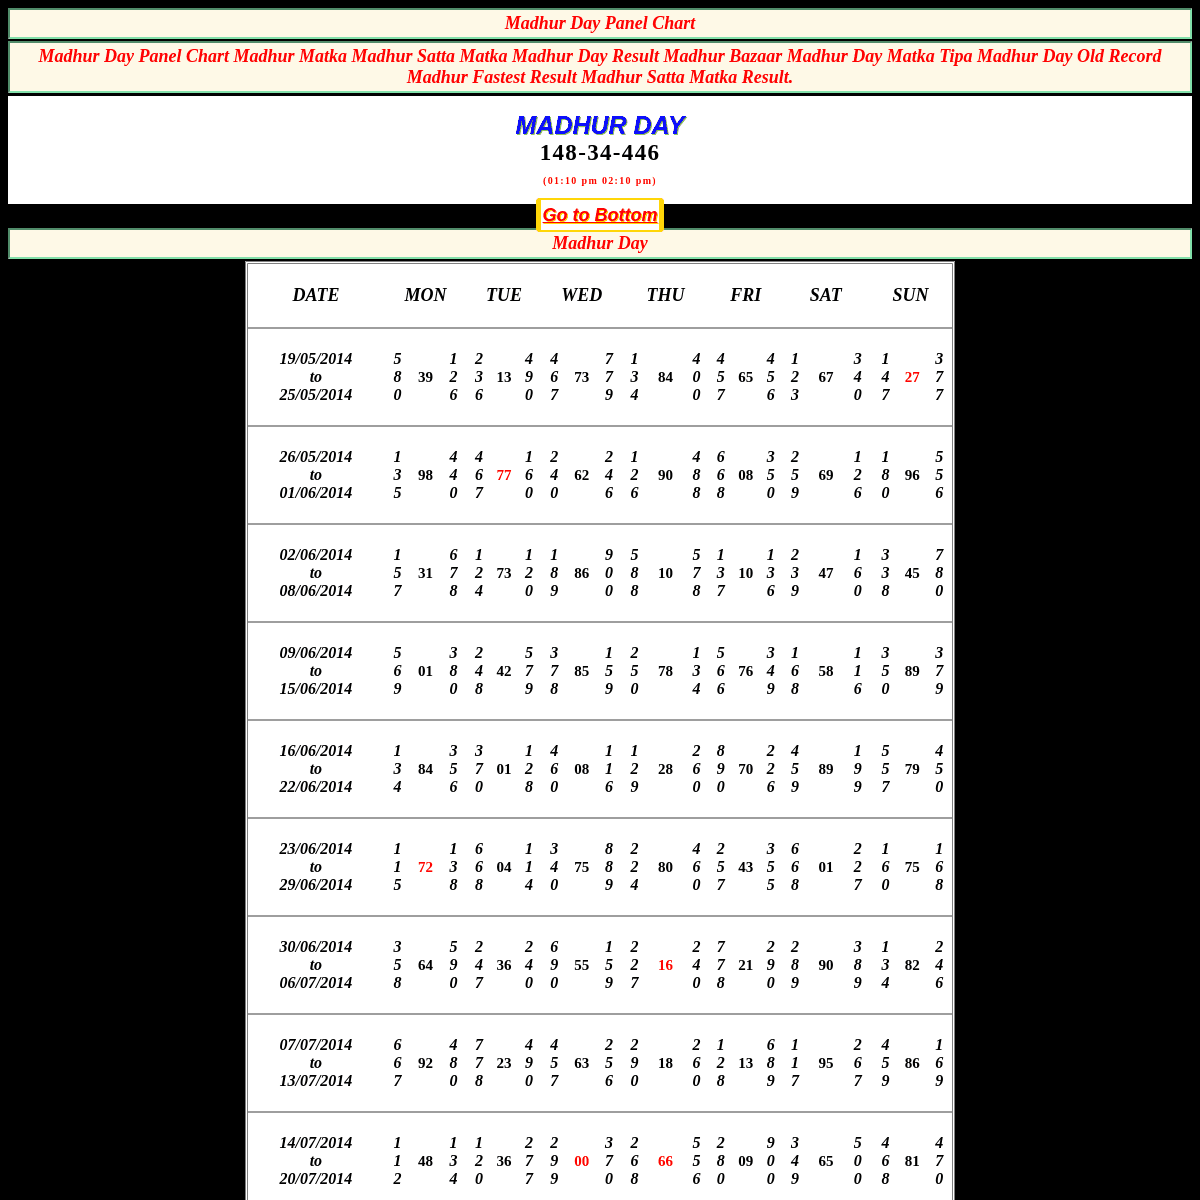 A complete backup of http://sattamatka.net.in/madhur-day-panel-chart.php